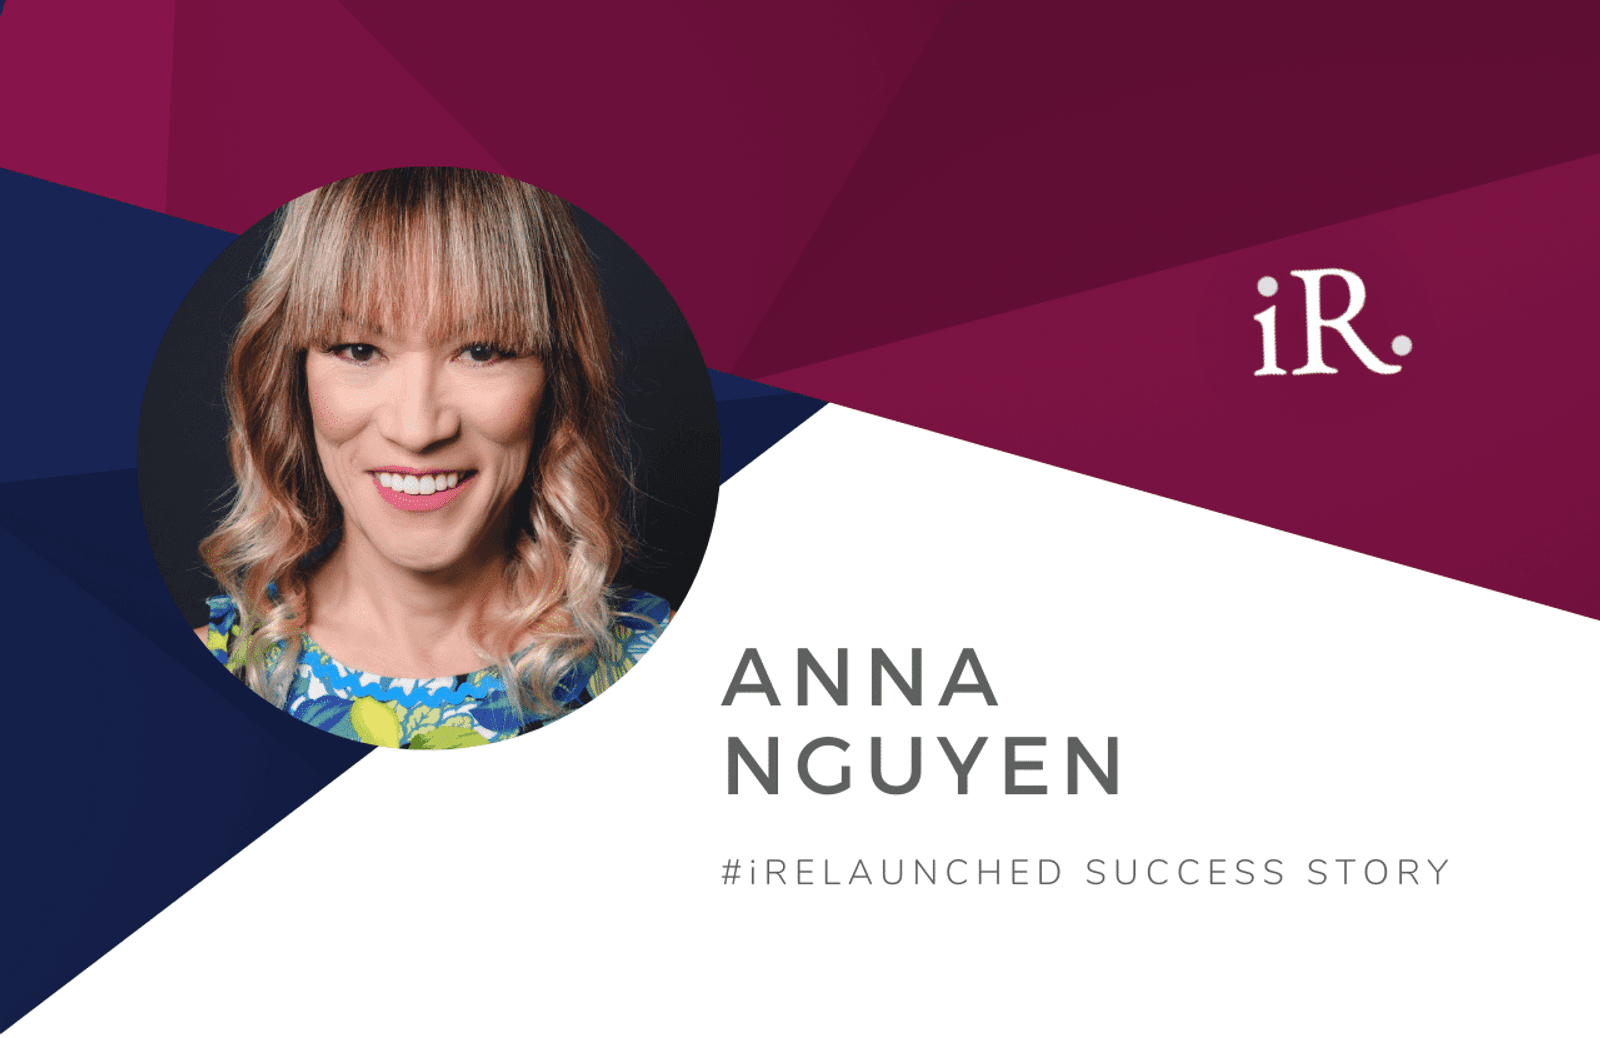 Anna Nguyen's headshot and the text #iRelaunched Success Story along with the iRelaunch logo.  A navy and maroon geometric textured background intersect behind Anna's headshot.